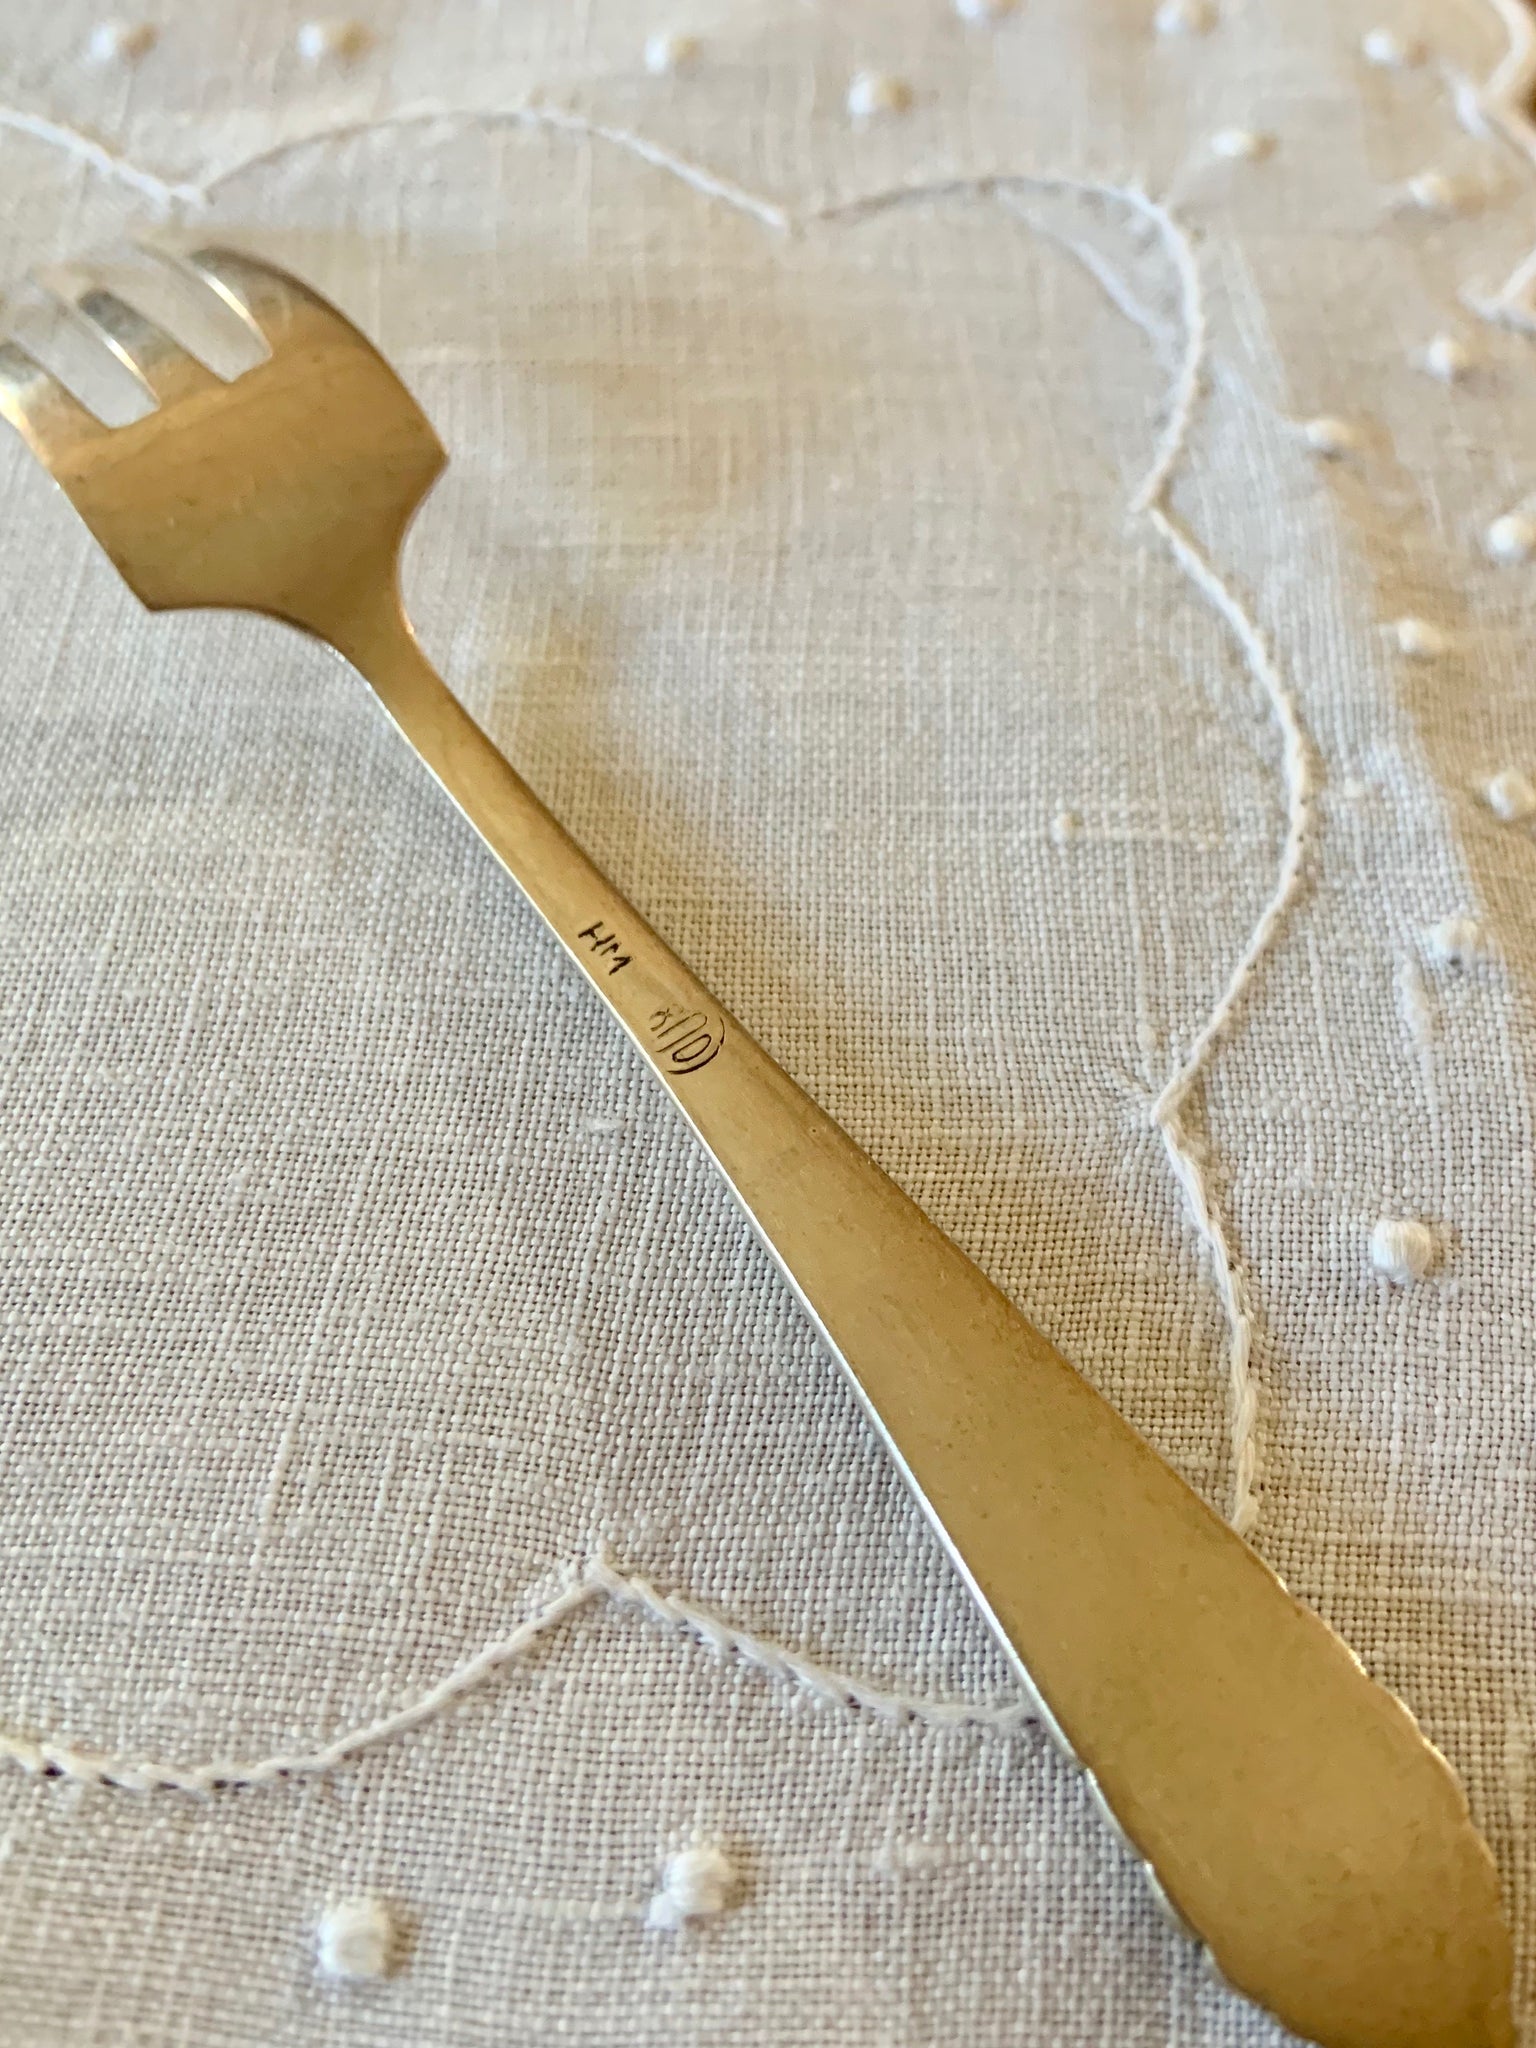 800 Silver Hors d'oeuvre Fork